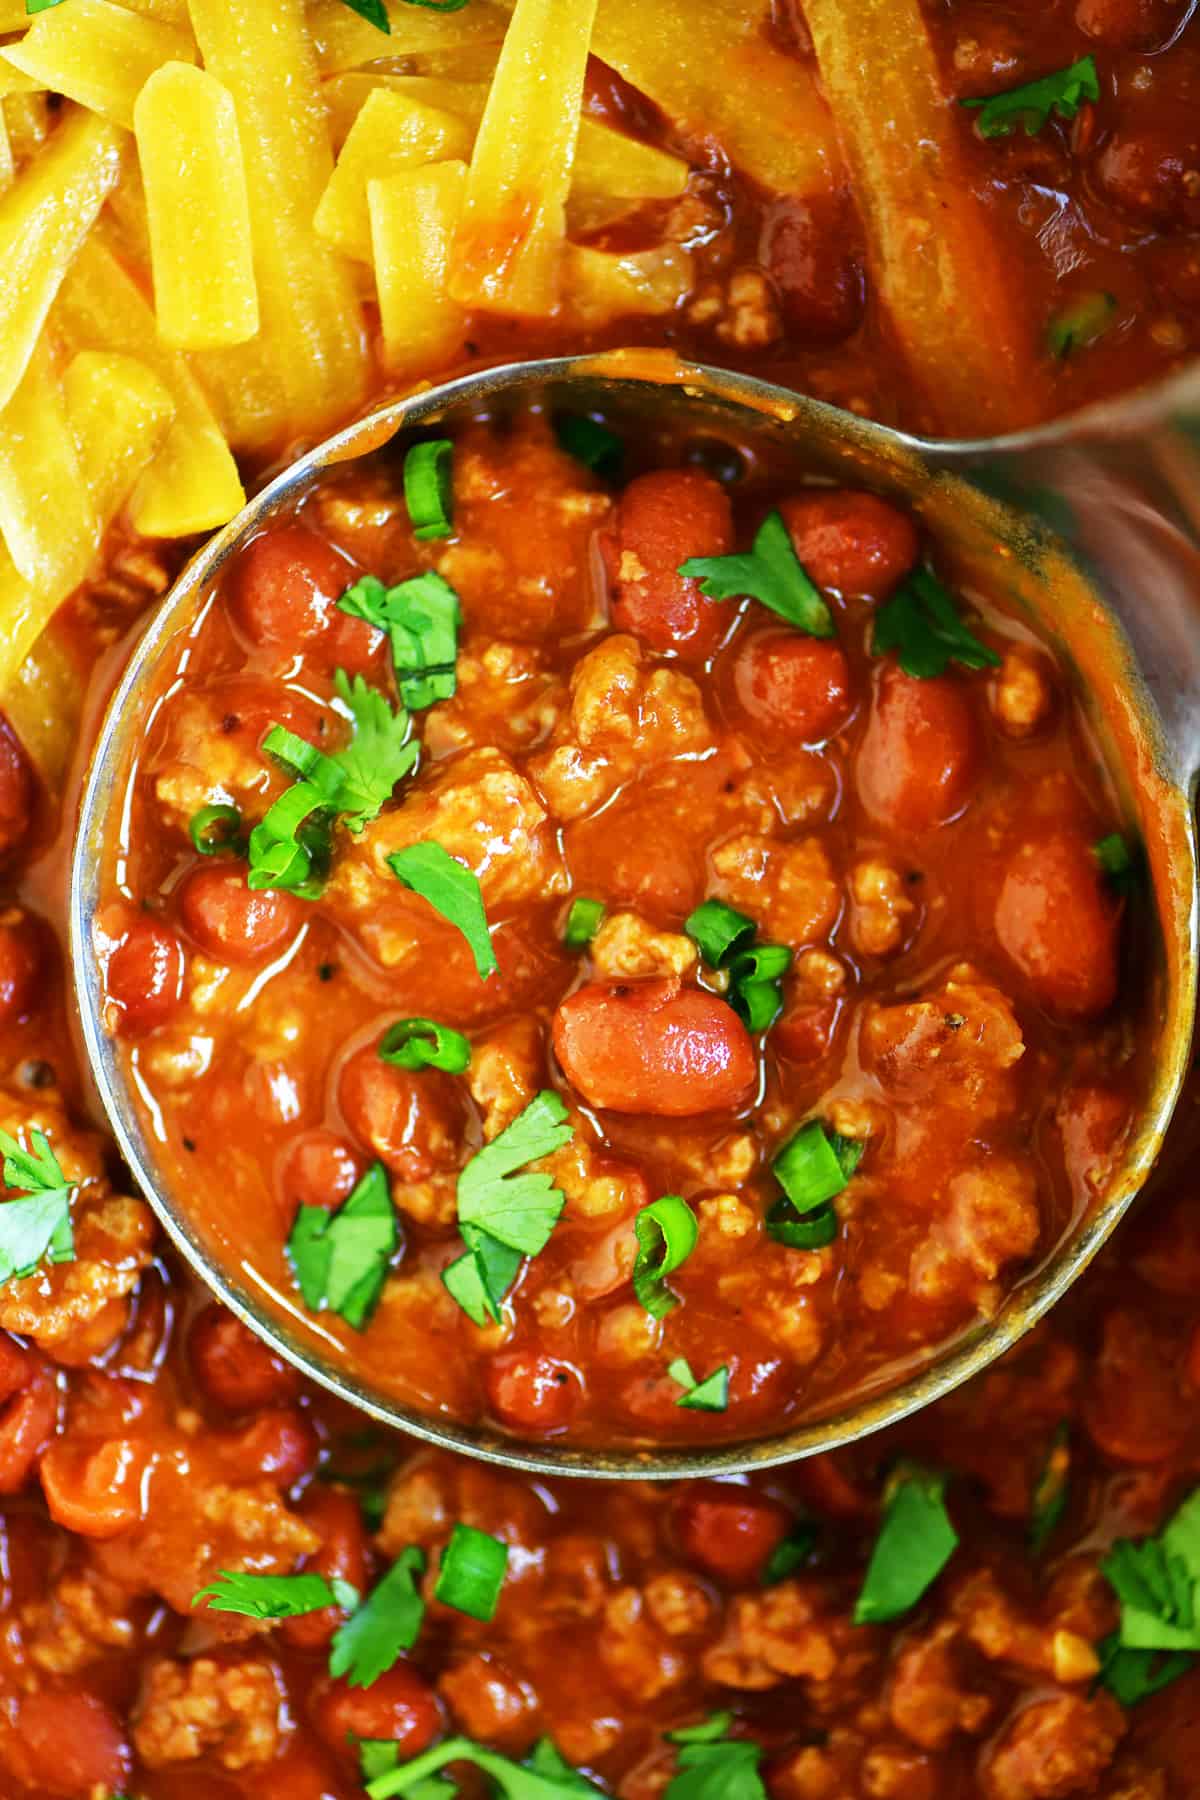 a close-up of the chili